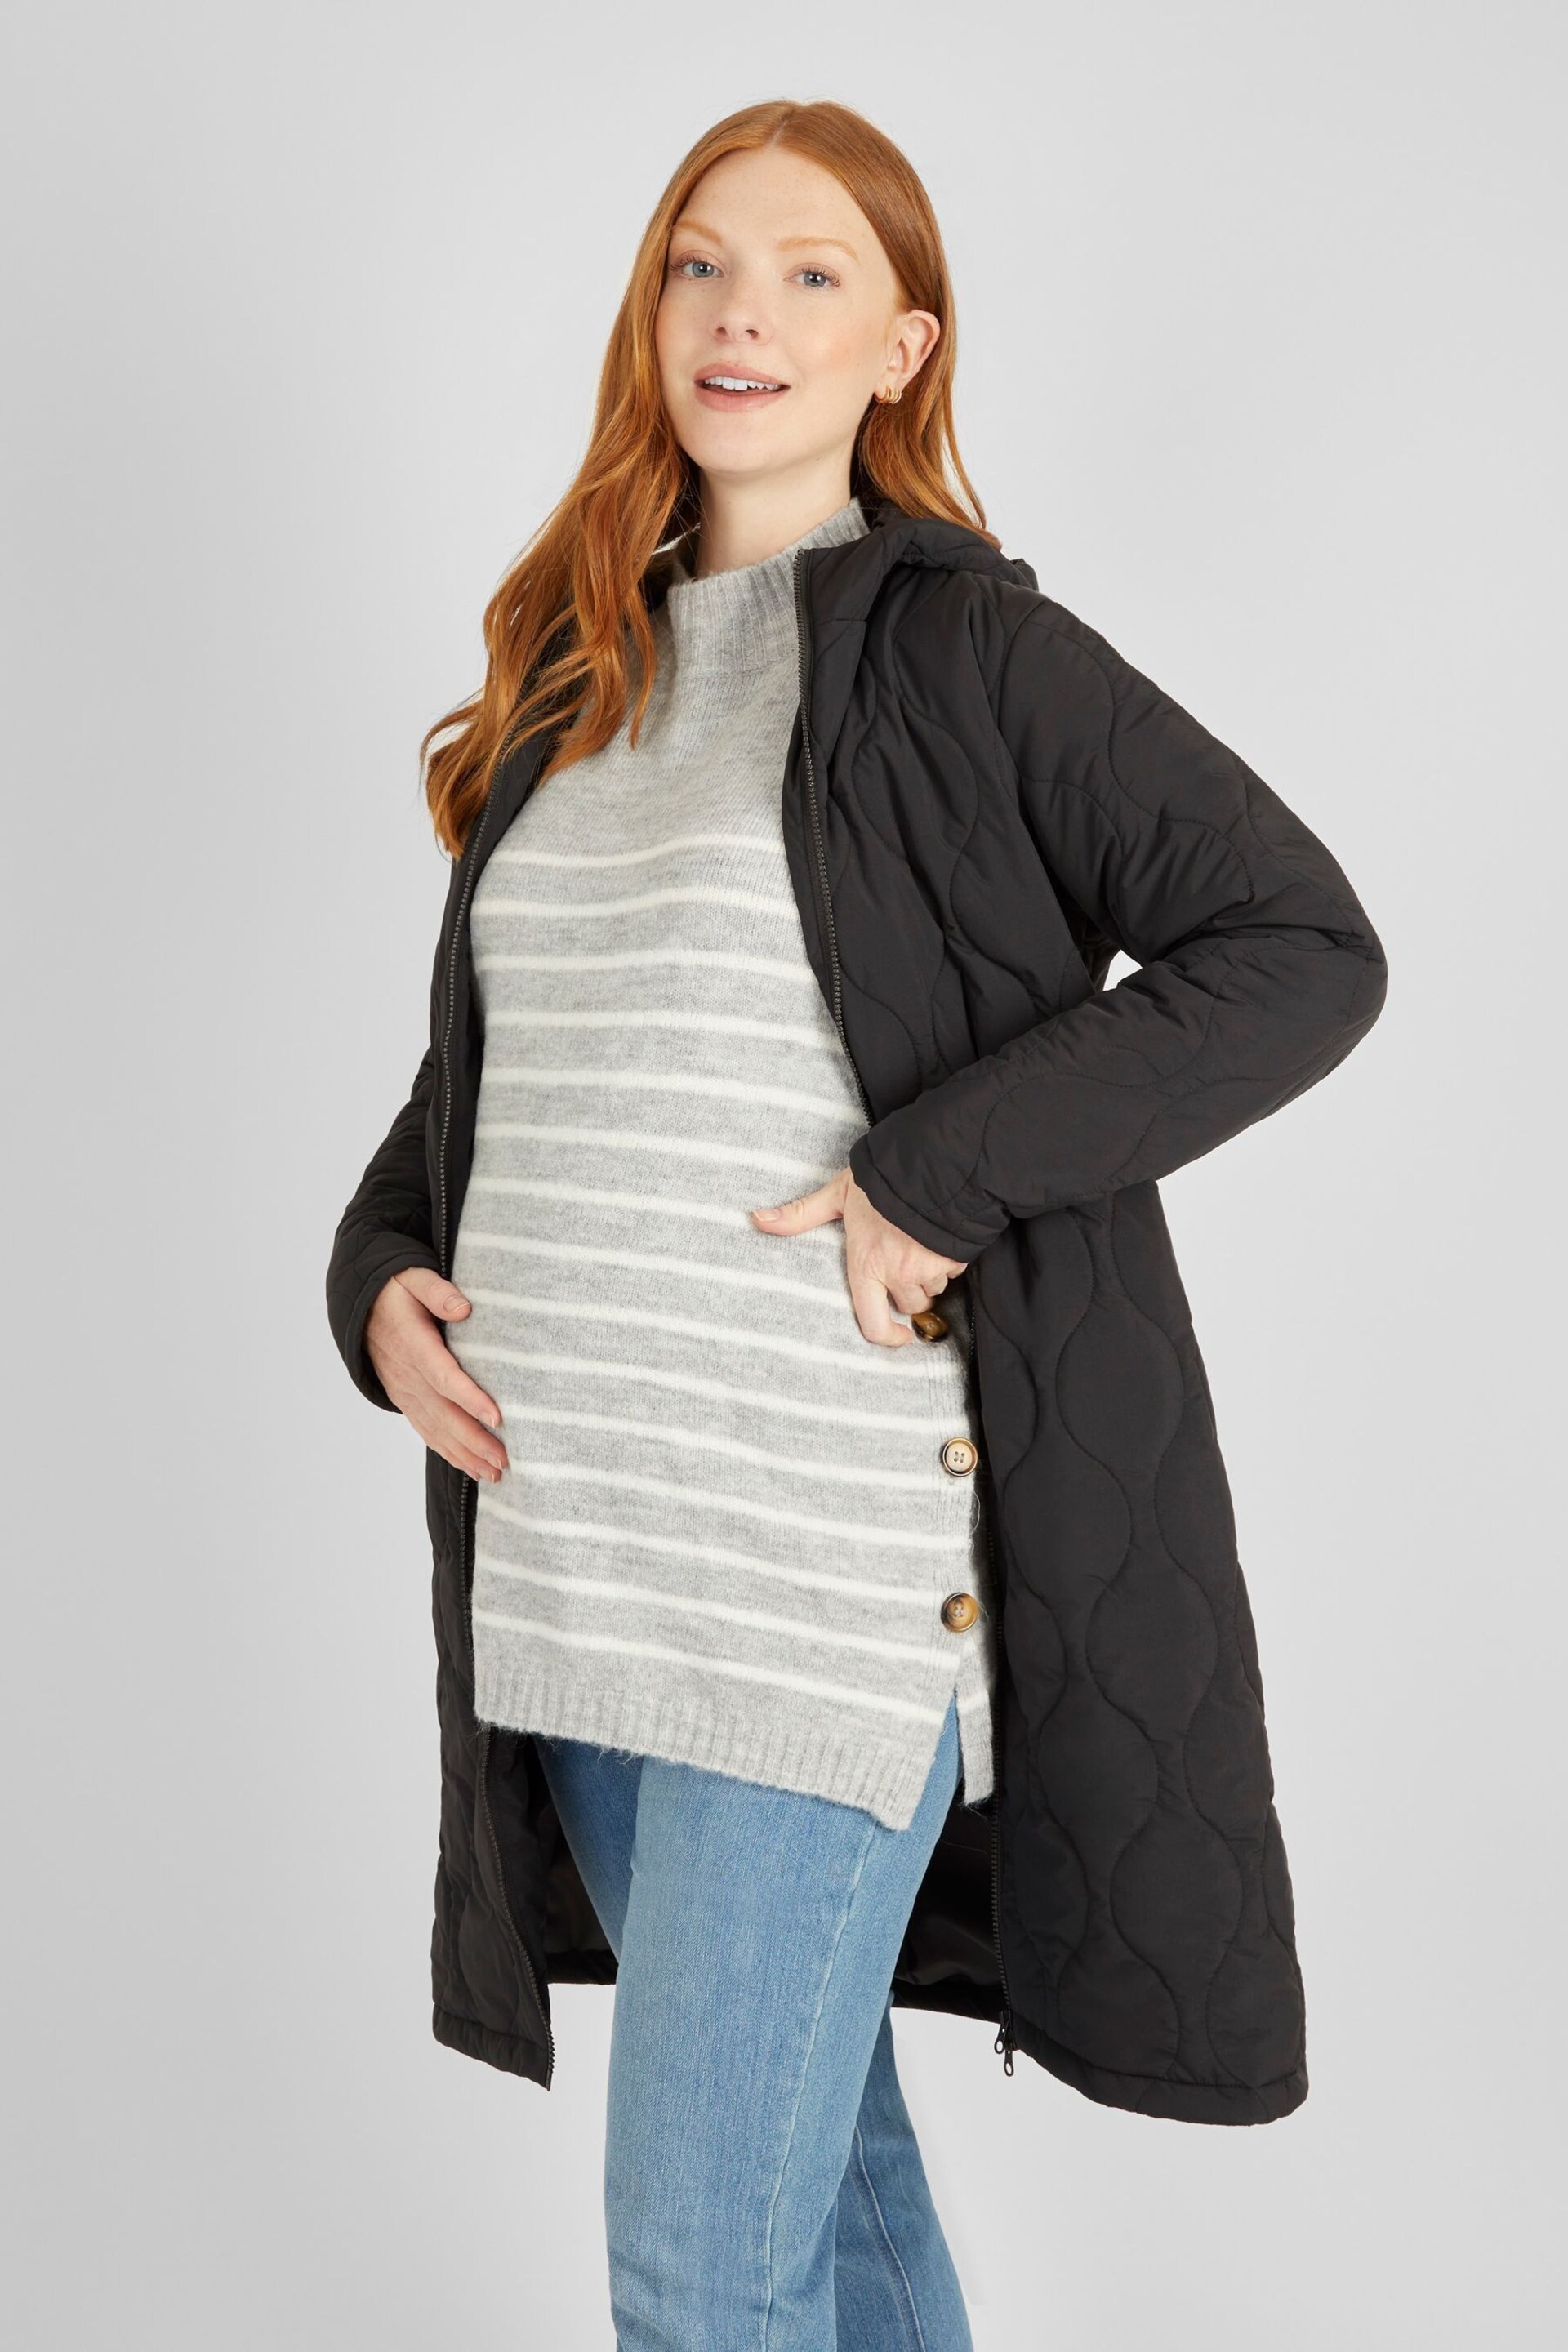 JoJo Maman Bébé Khaki 2-in-1 Quilted Maternity Puffer Coat - Image 4 of 6